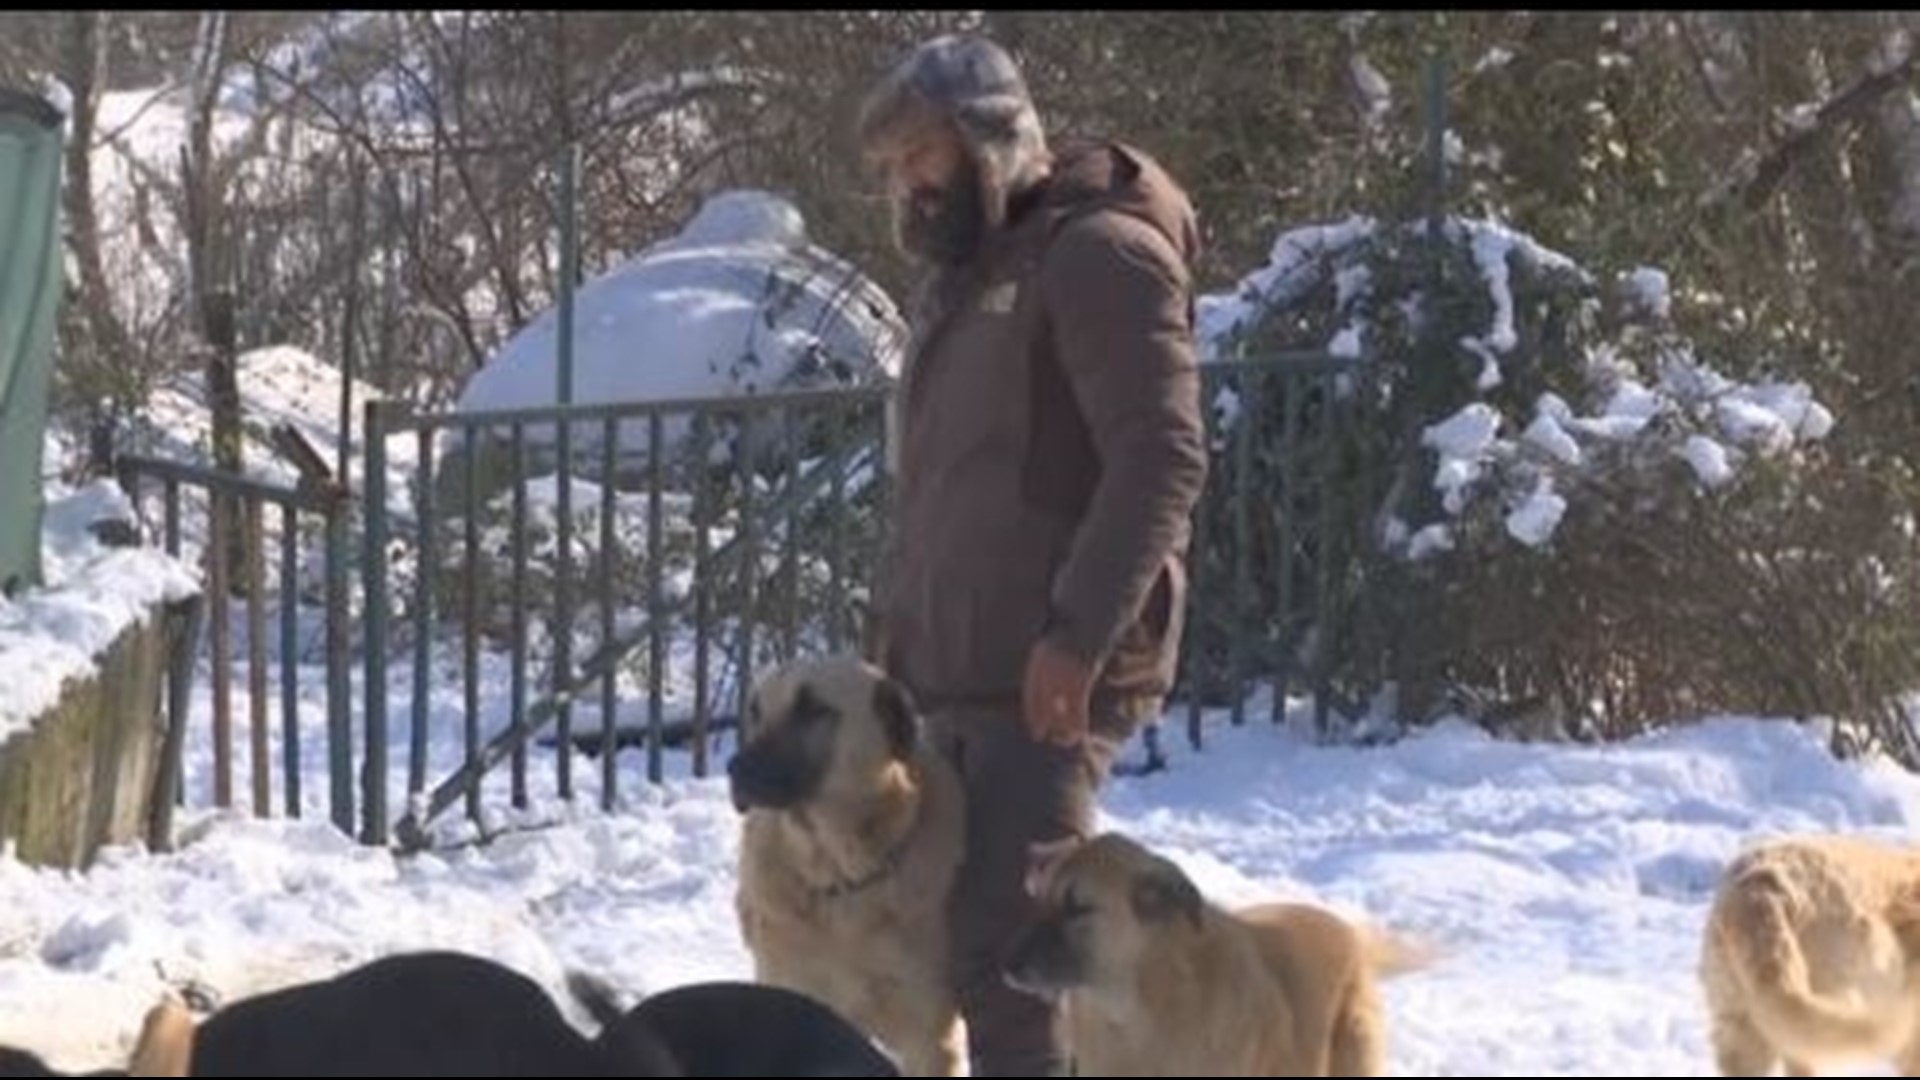 Tugay Abukan is known as the 'forest angel' for his work caring for dogs in a Turkish forest that is a popular place for owners to abandon their pets.